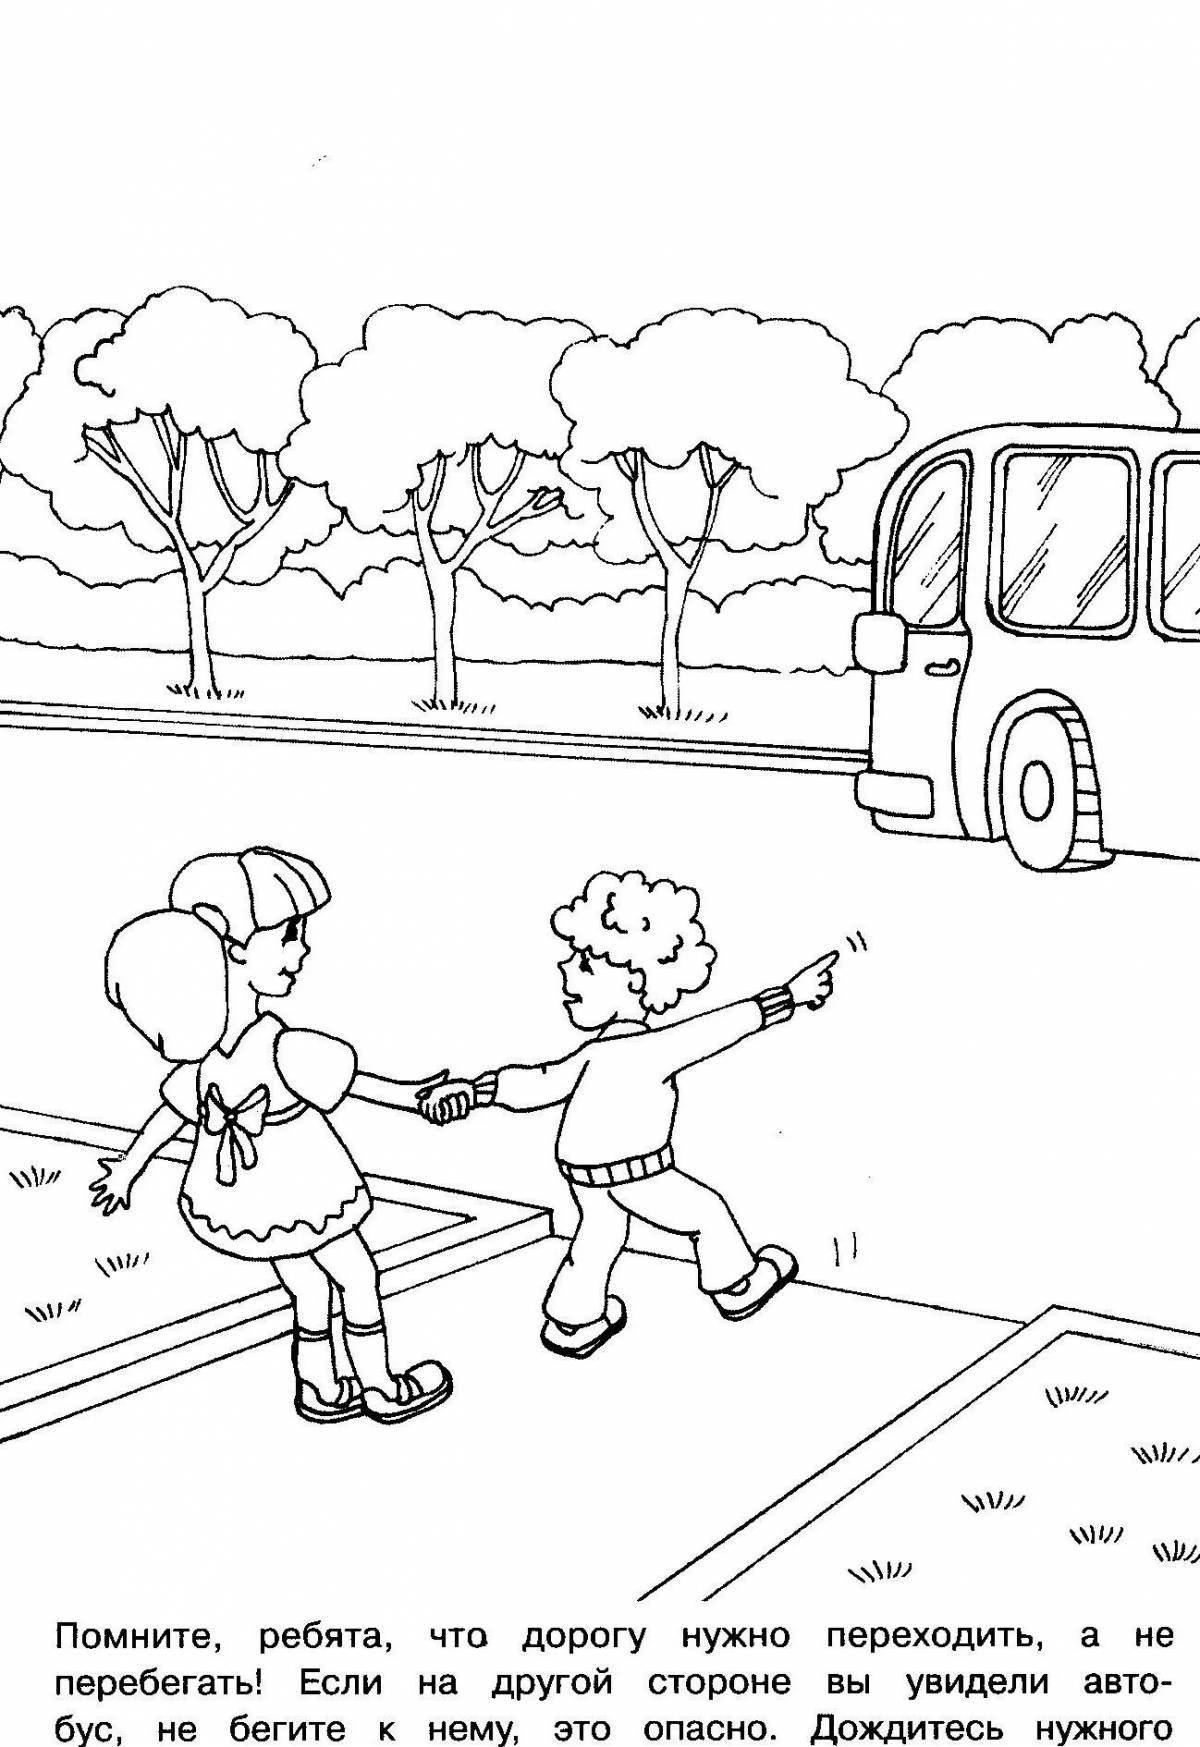 Creative rules of the road coloring for grade 1